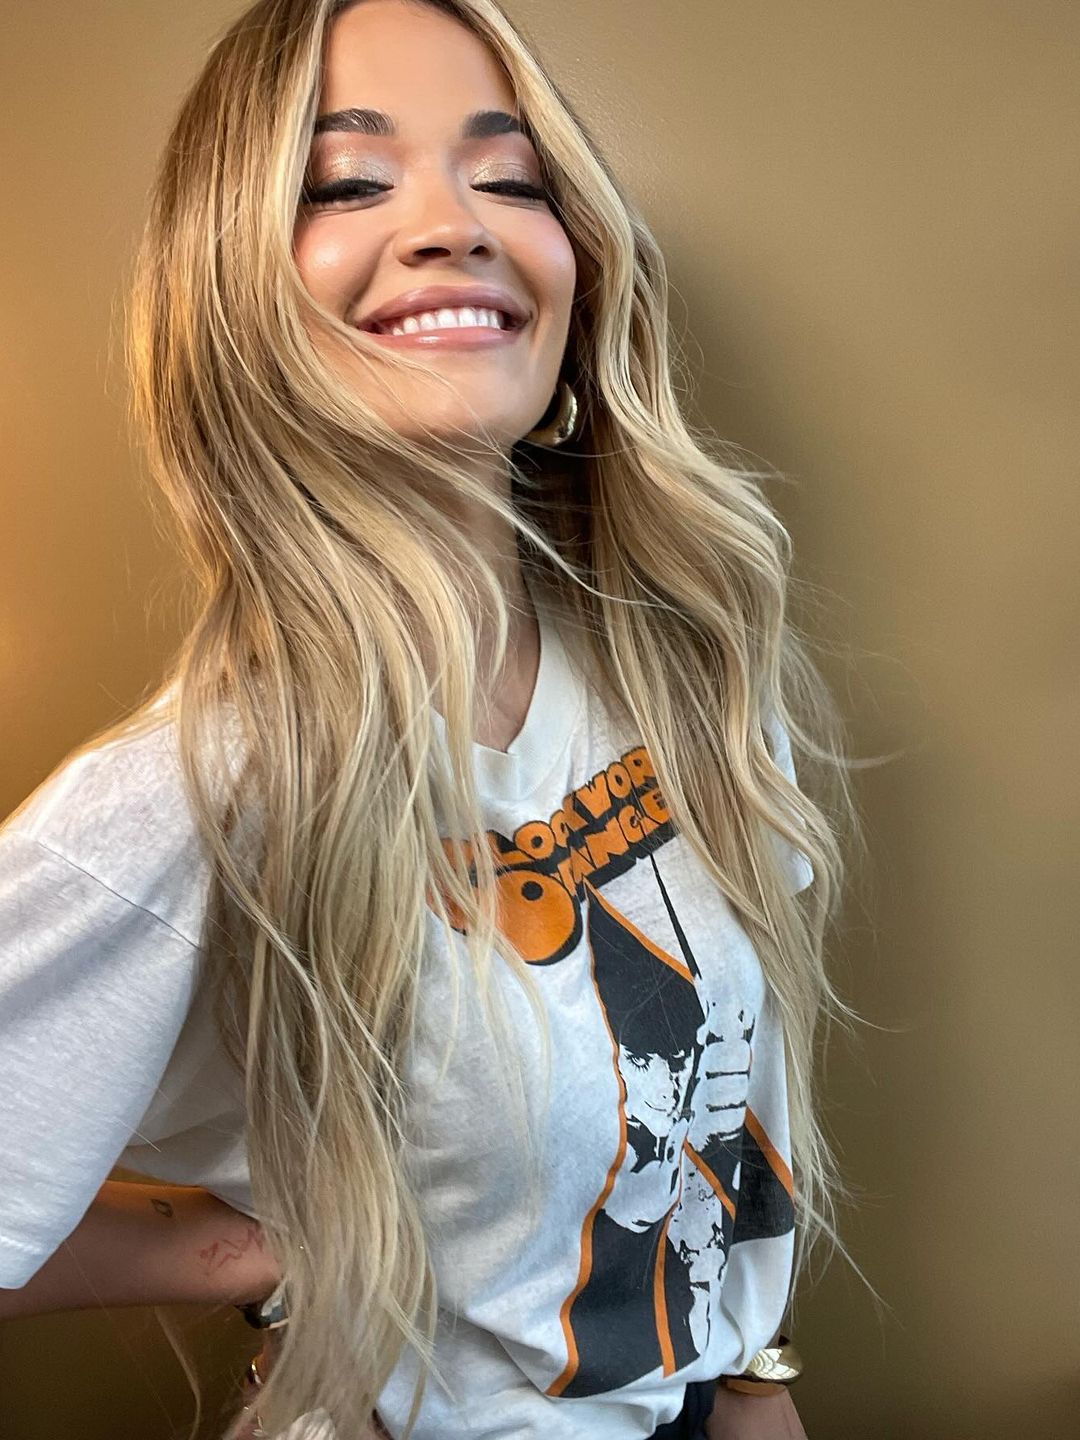 Rita Ora shares a smiling picture of her in a graphic tee 